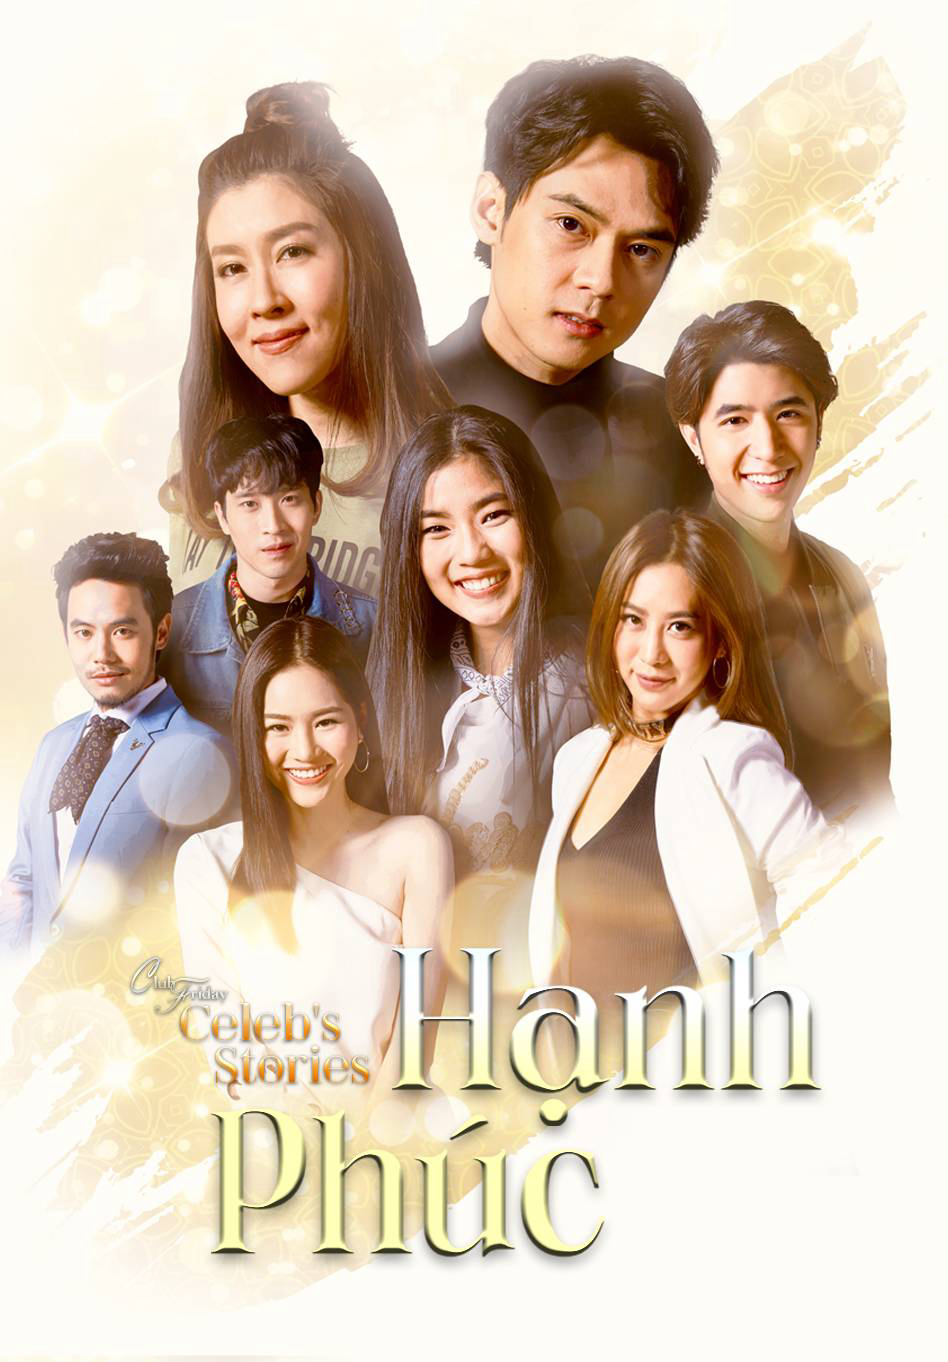 Poster Phim Hạnh Phúc (Club Friday Celebs Stories: Happiness)